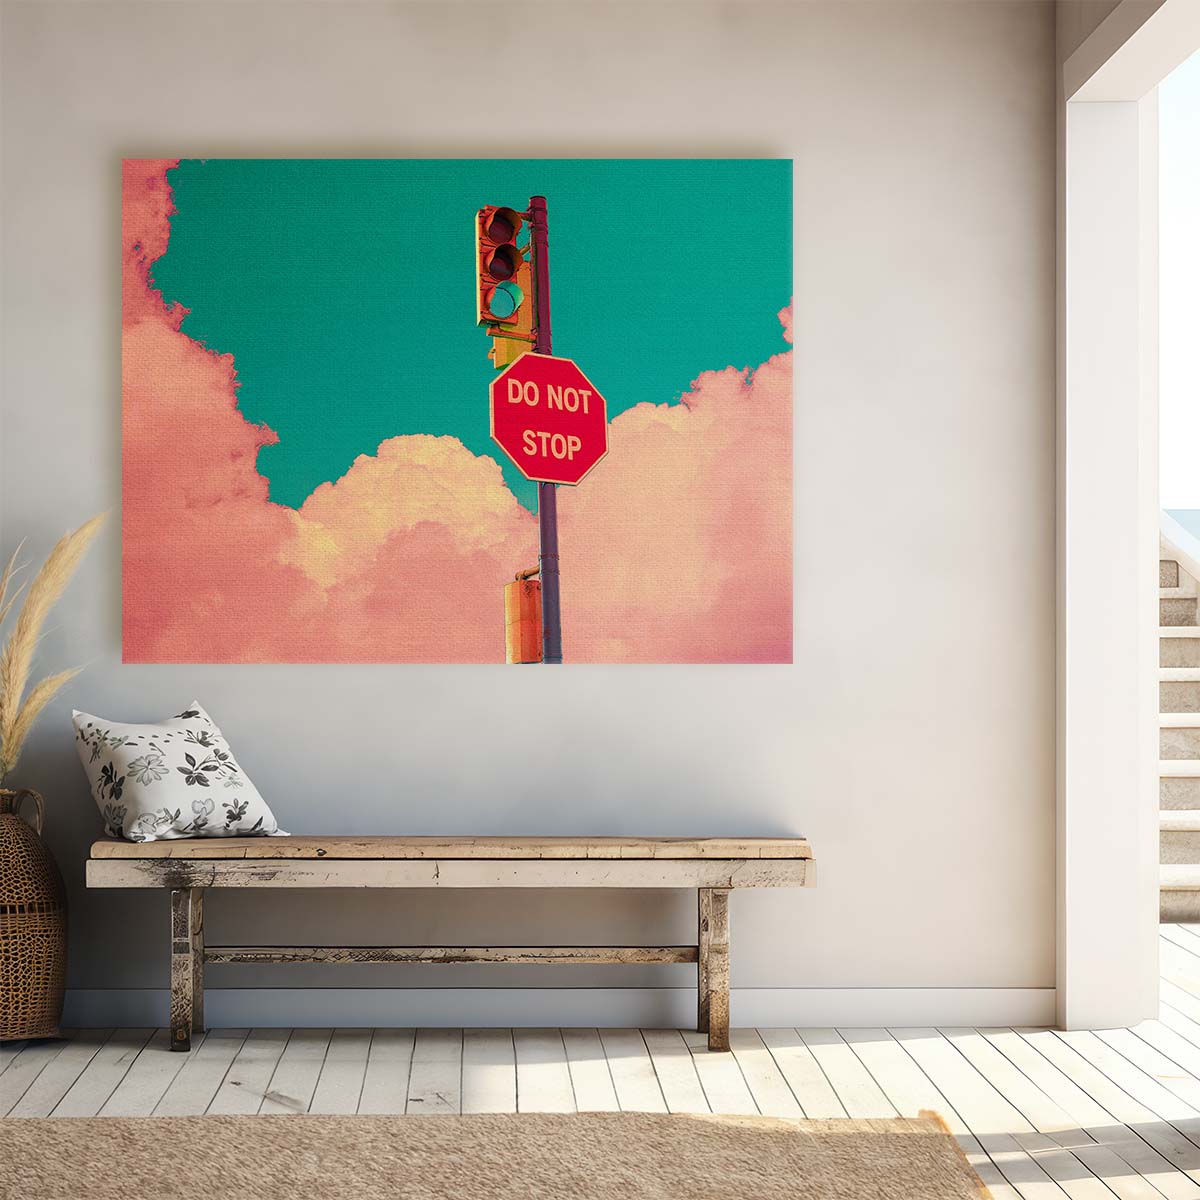 Surreal Motivational StopGo Signpost Wall Art by Luxuriance Designs. Made in USA.